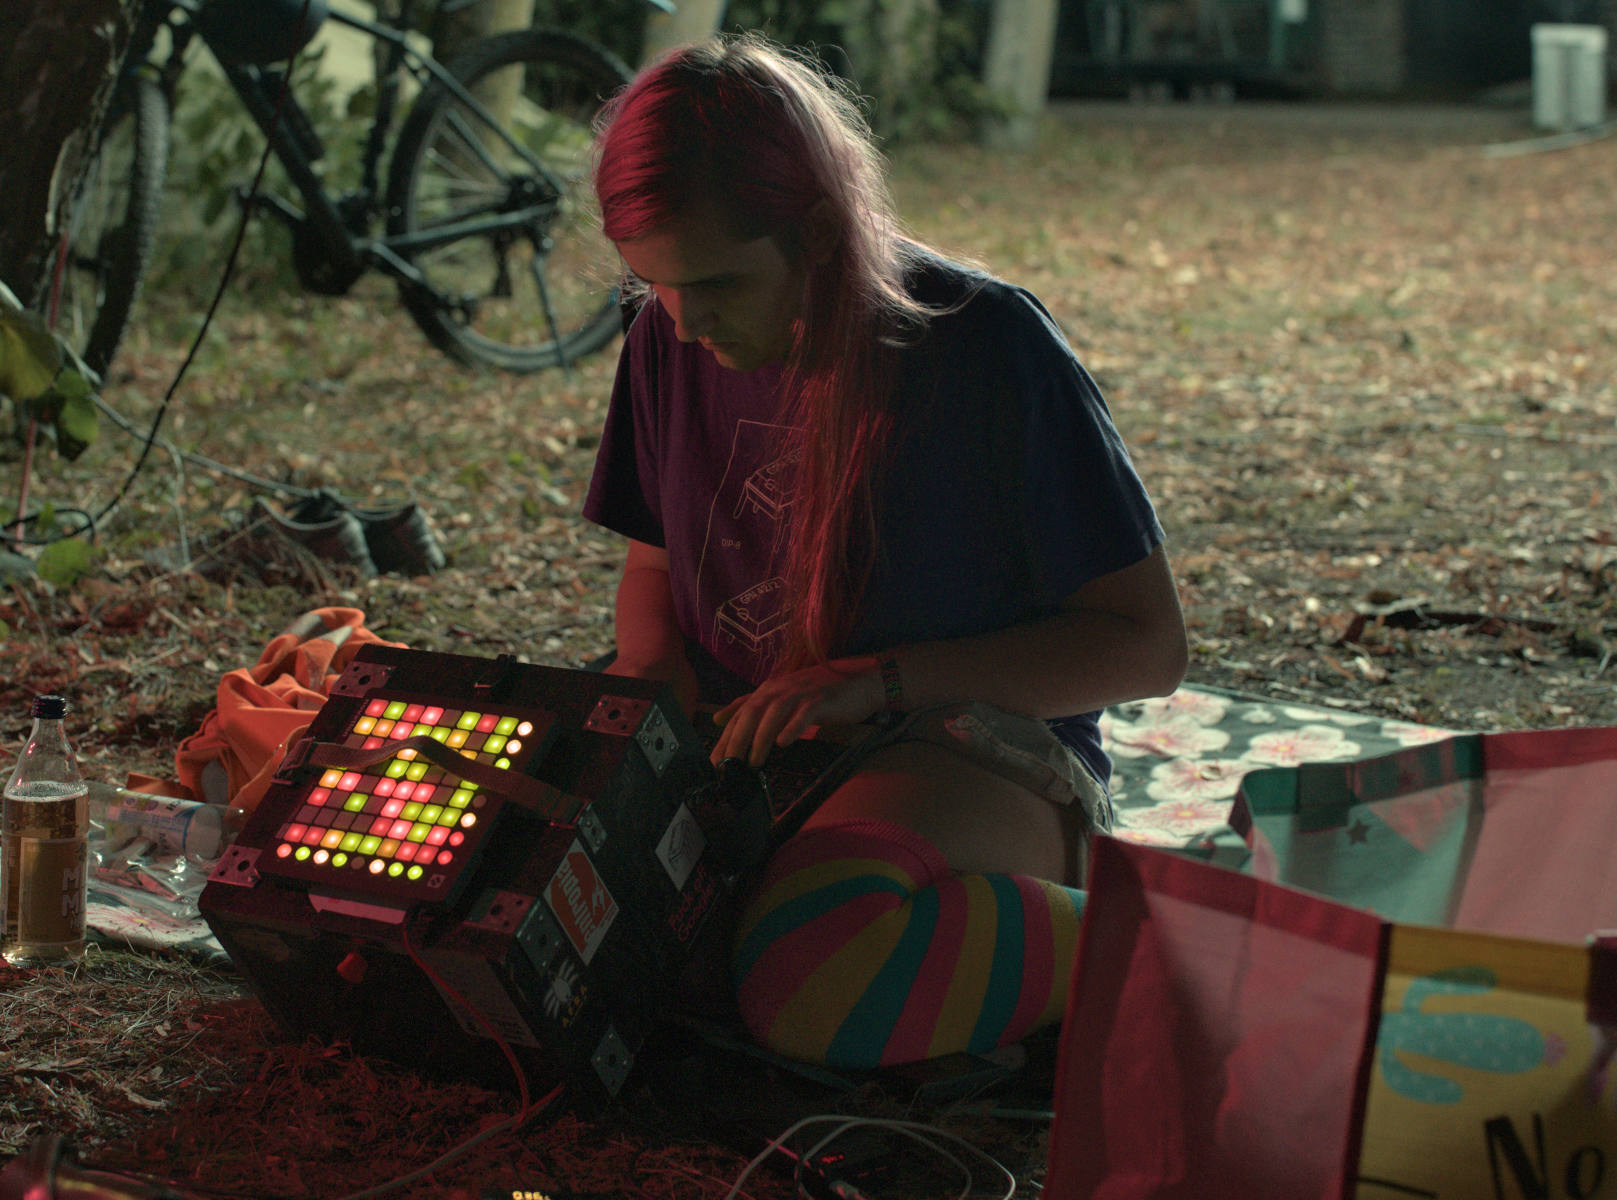 picture of me in a forest-y area on cccamp23; i'm doing something on the luggable, which rests partially on the ground. the luggable has a bunch of blinky lights on top of it